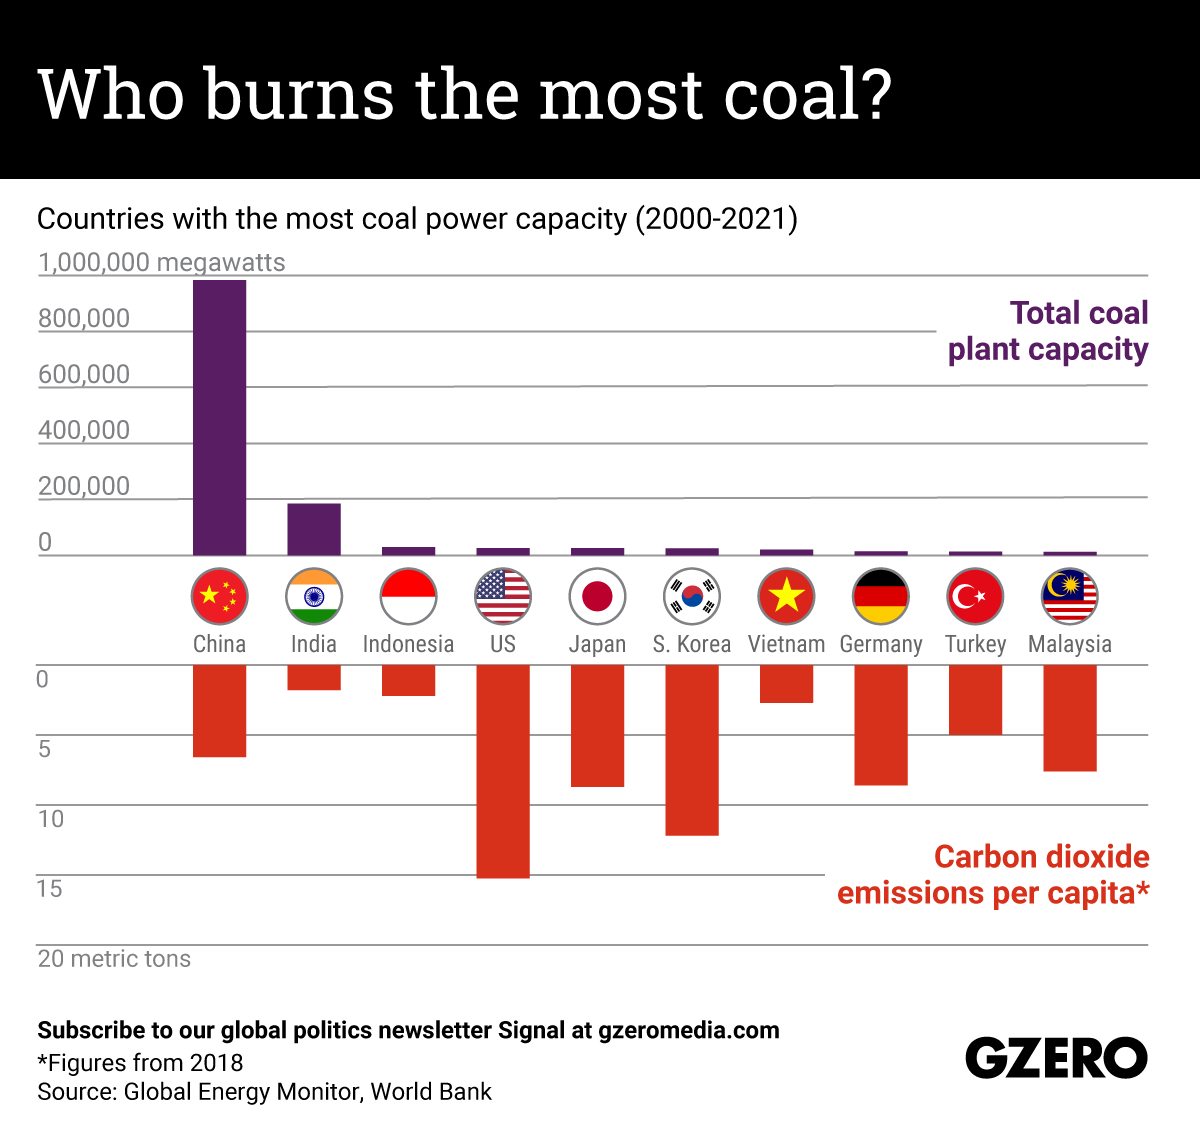 Countries with the most coal power capacity (2000-2021)